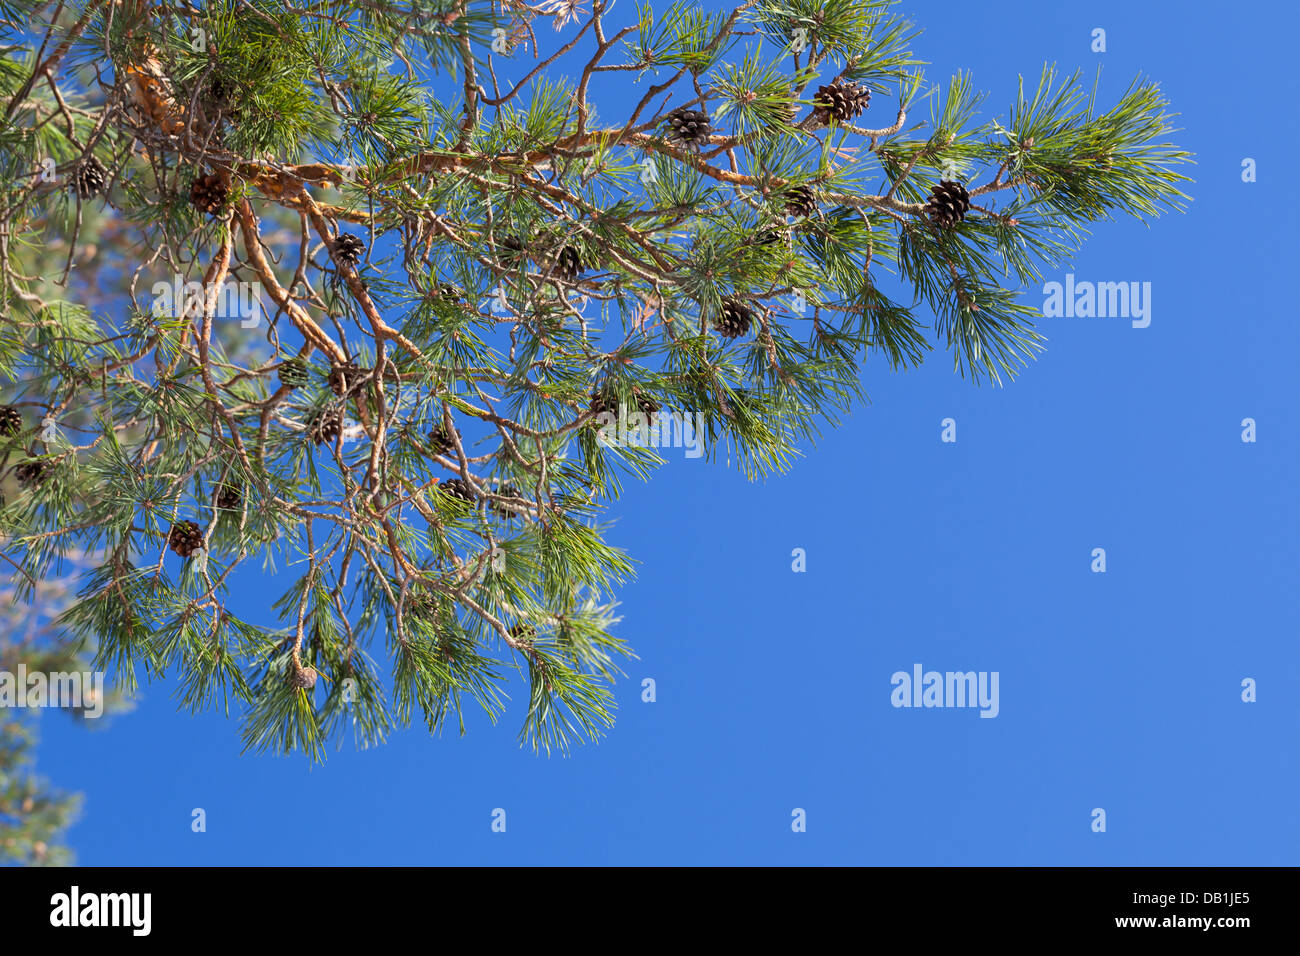 Pine tree branch above clear blue sky Stock Photo